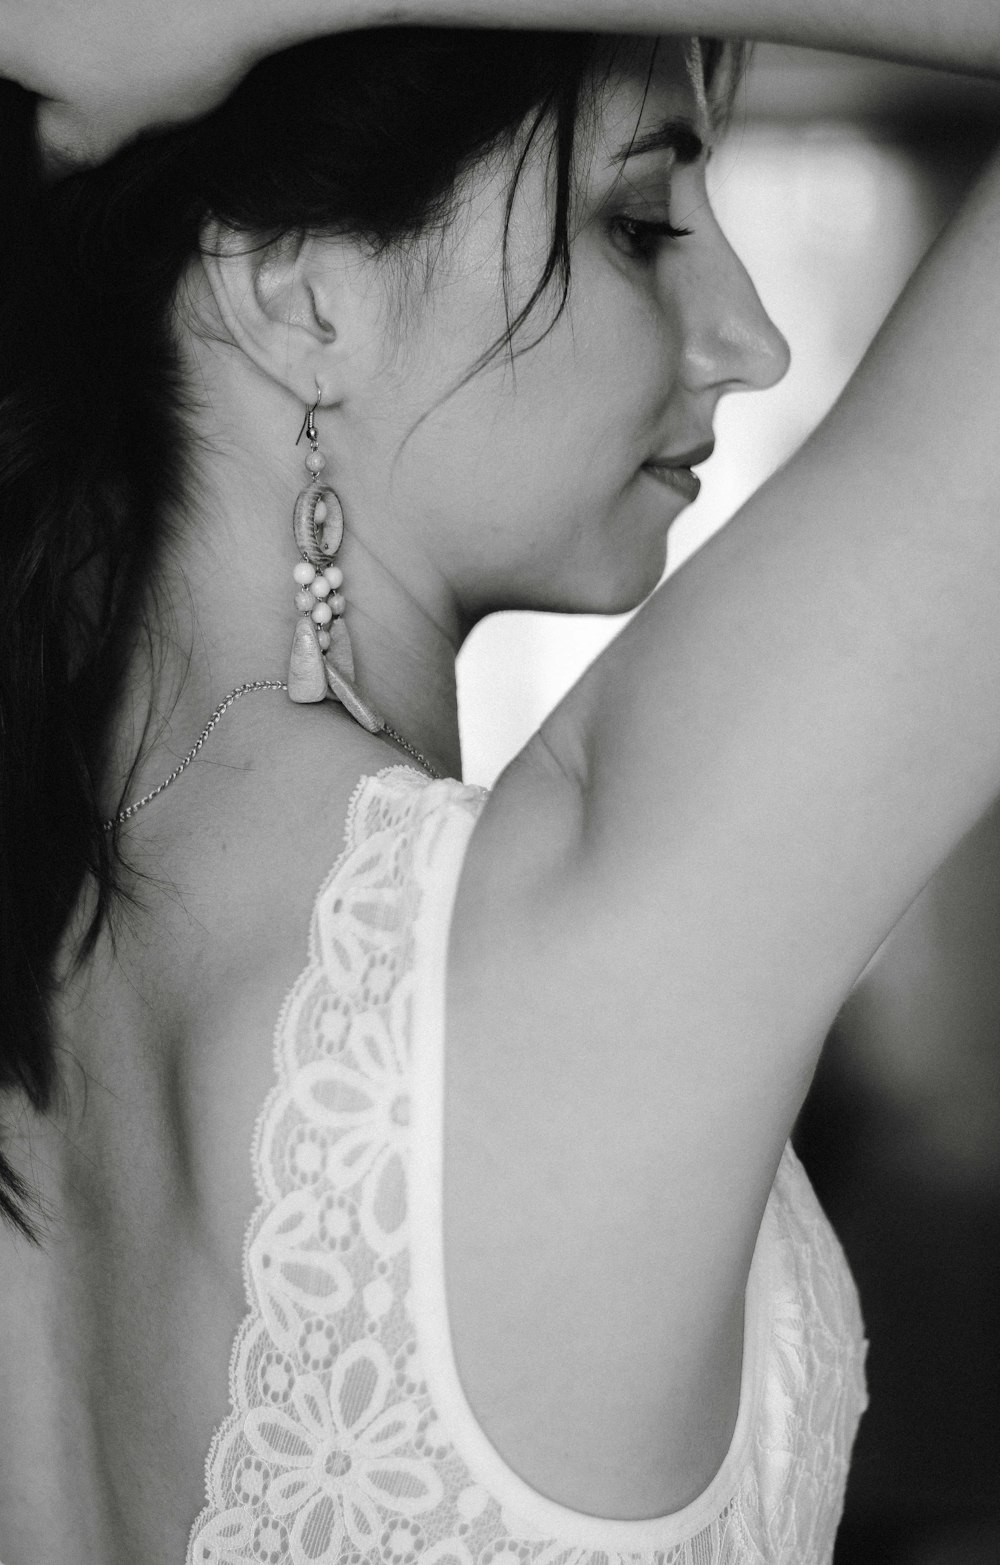 grayscale photography of woman wearing white top